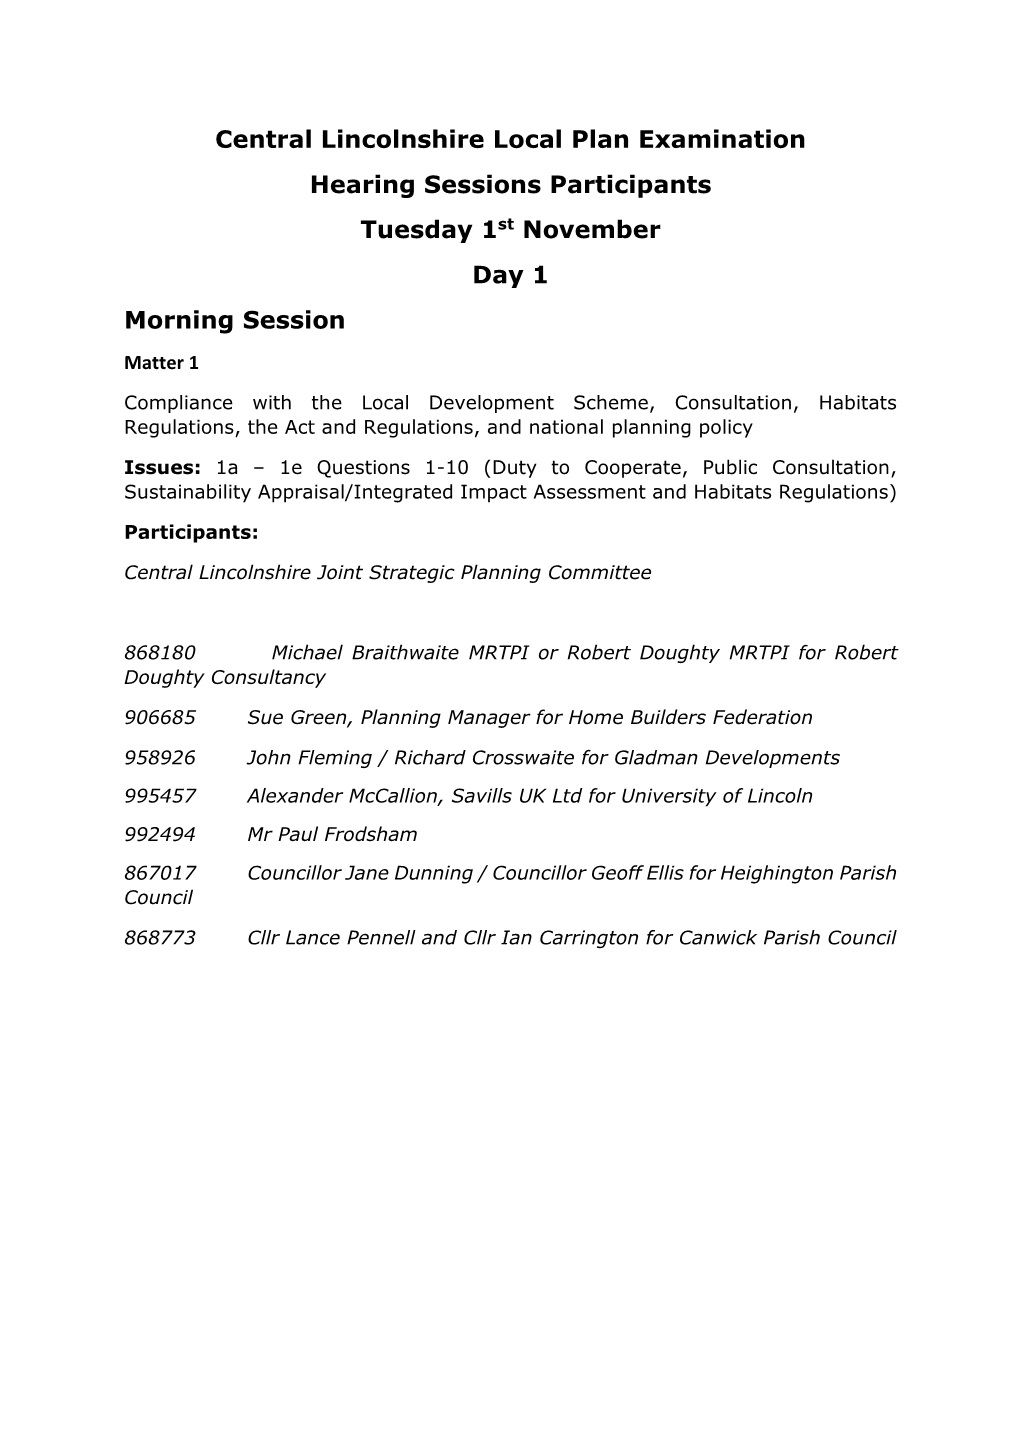 Central Lincolnshire Local Plan Examination Hearing Sessions Participants Tuesday 1St November Day 1 Morning Session Matter 1